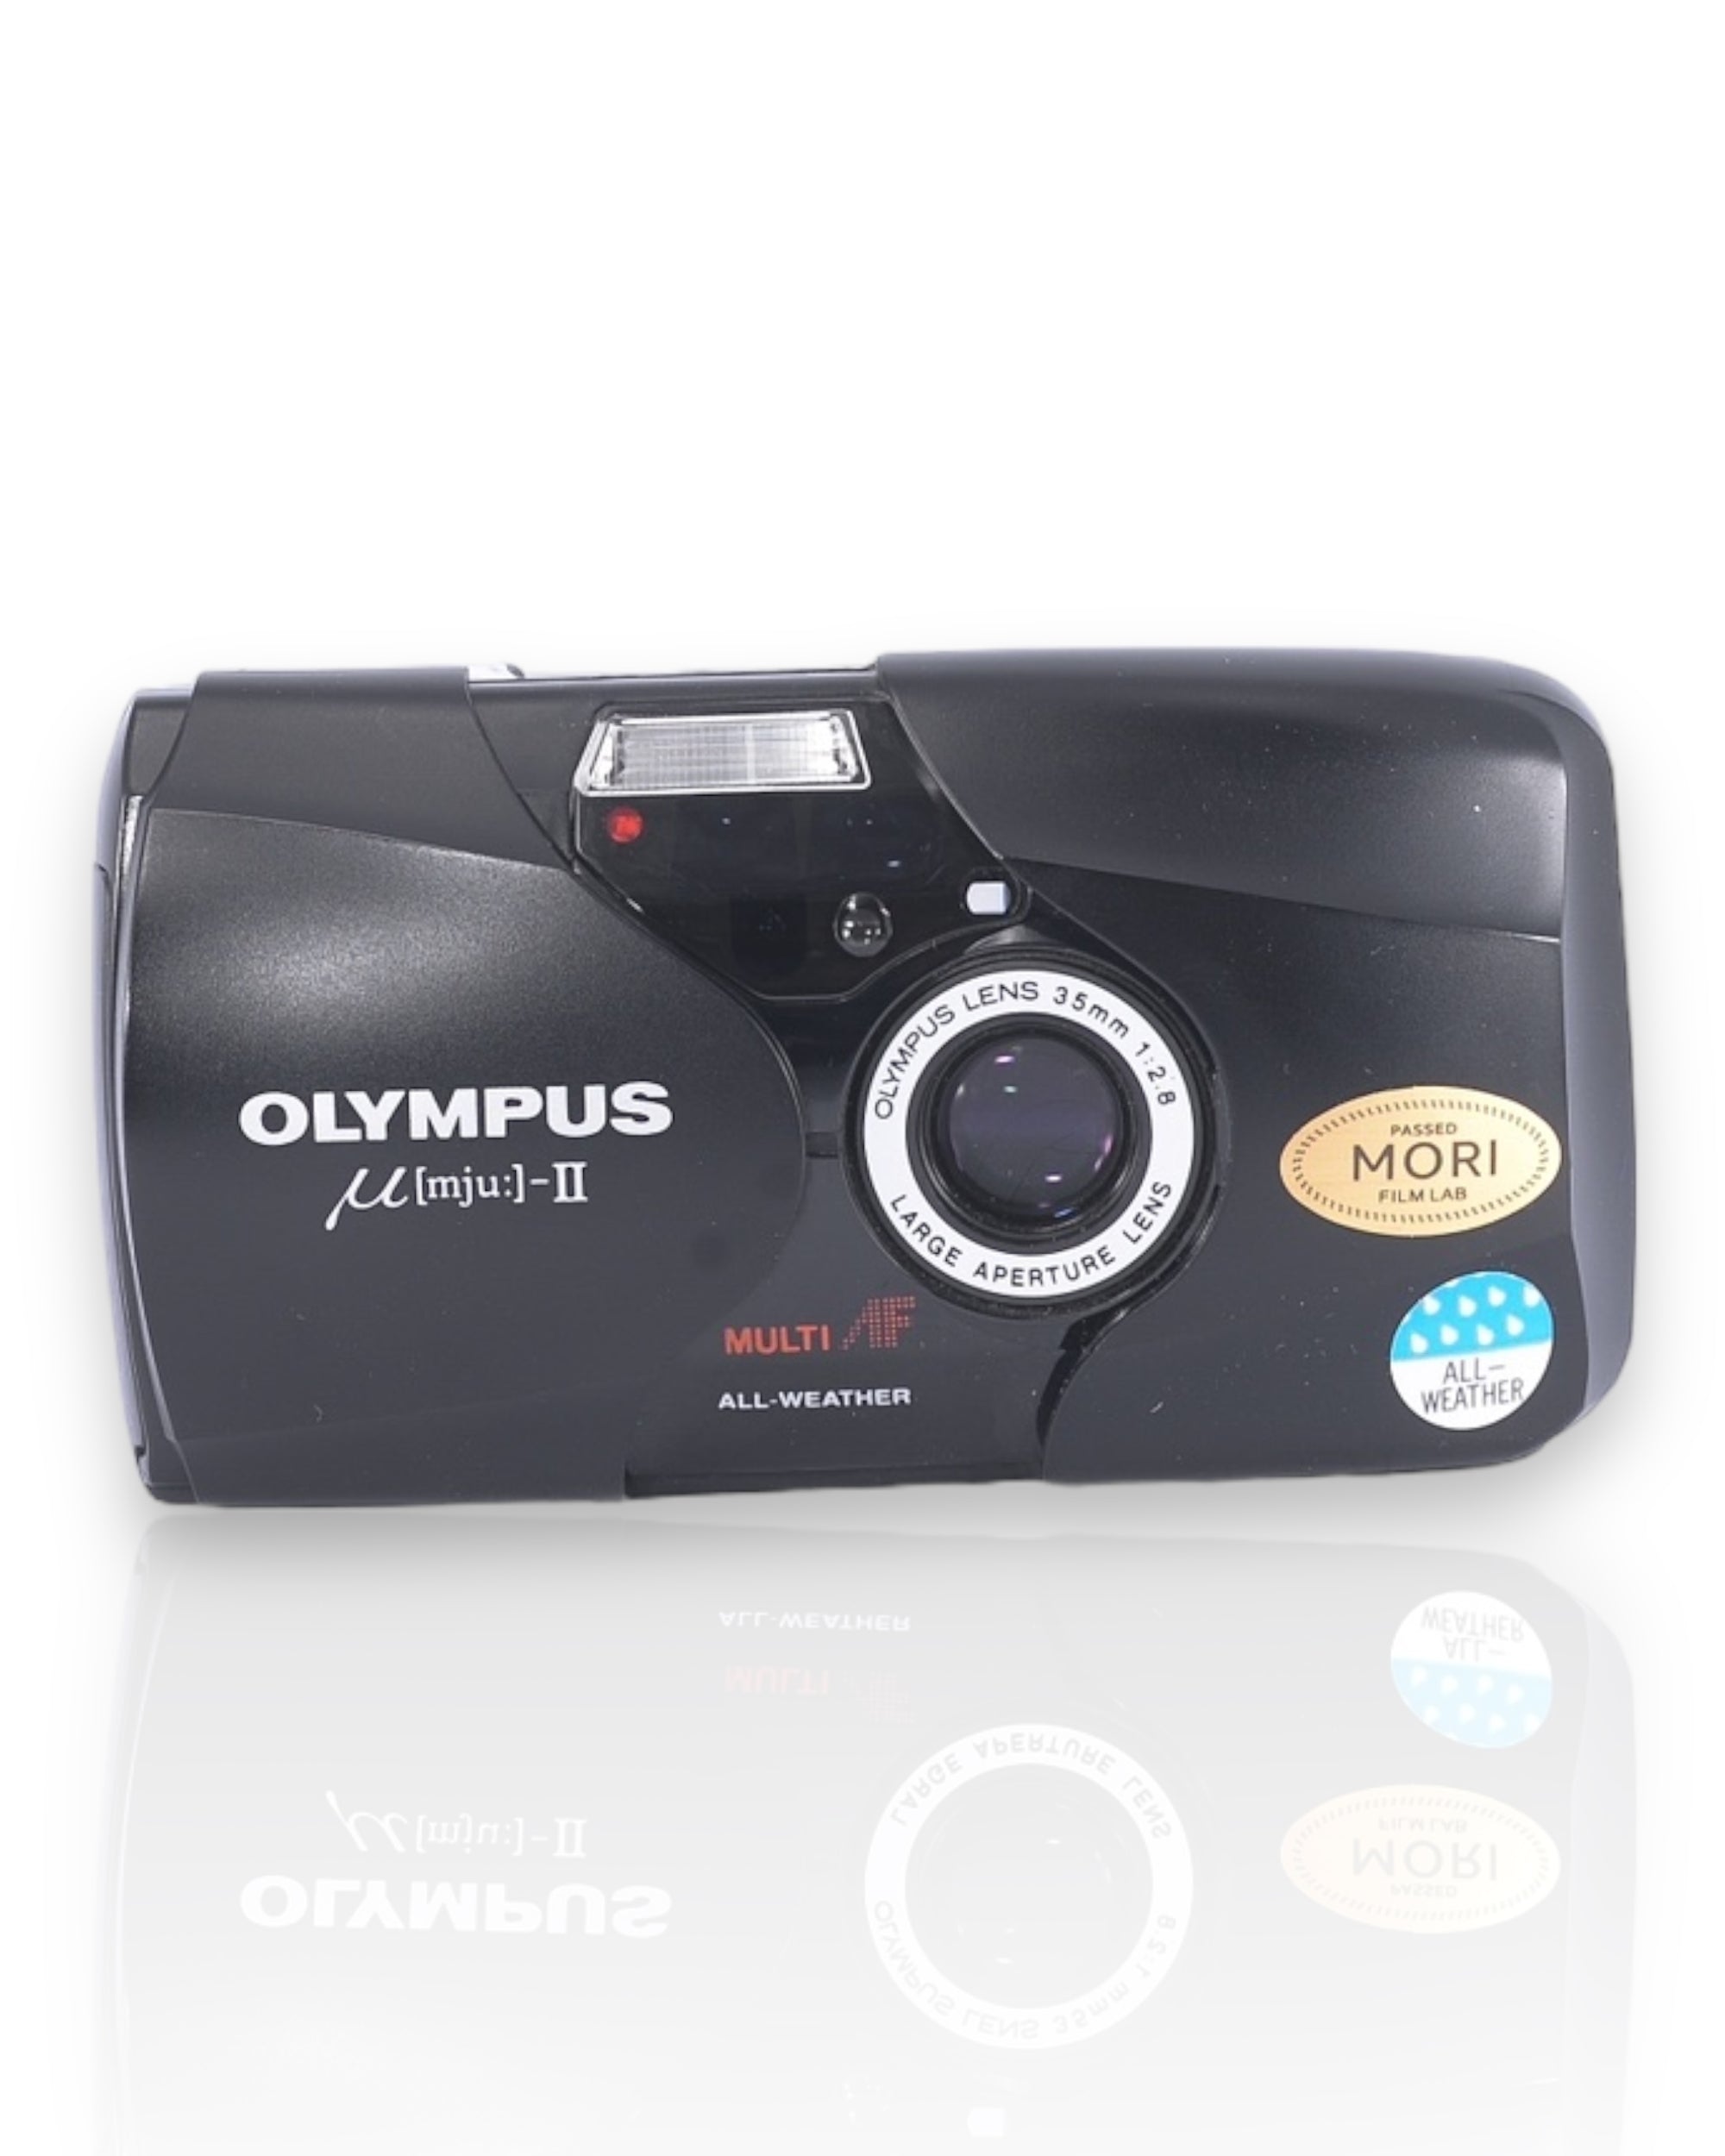 BOXED Olympus Mju-II 35mm point & shoot camera with 35mm f2.8 lens